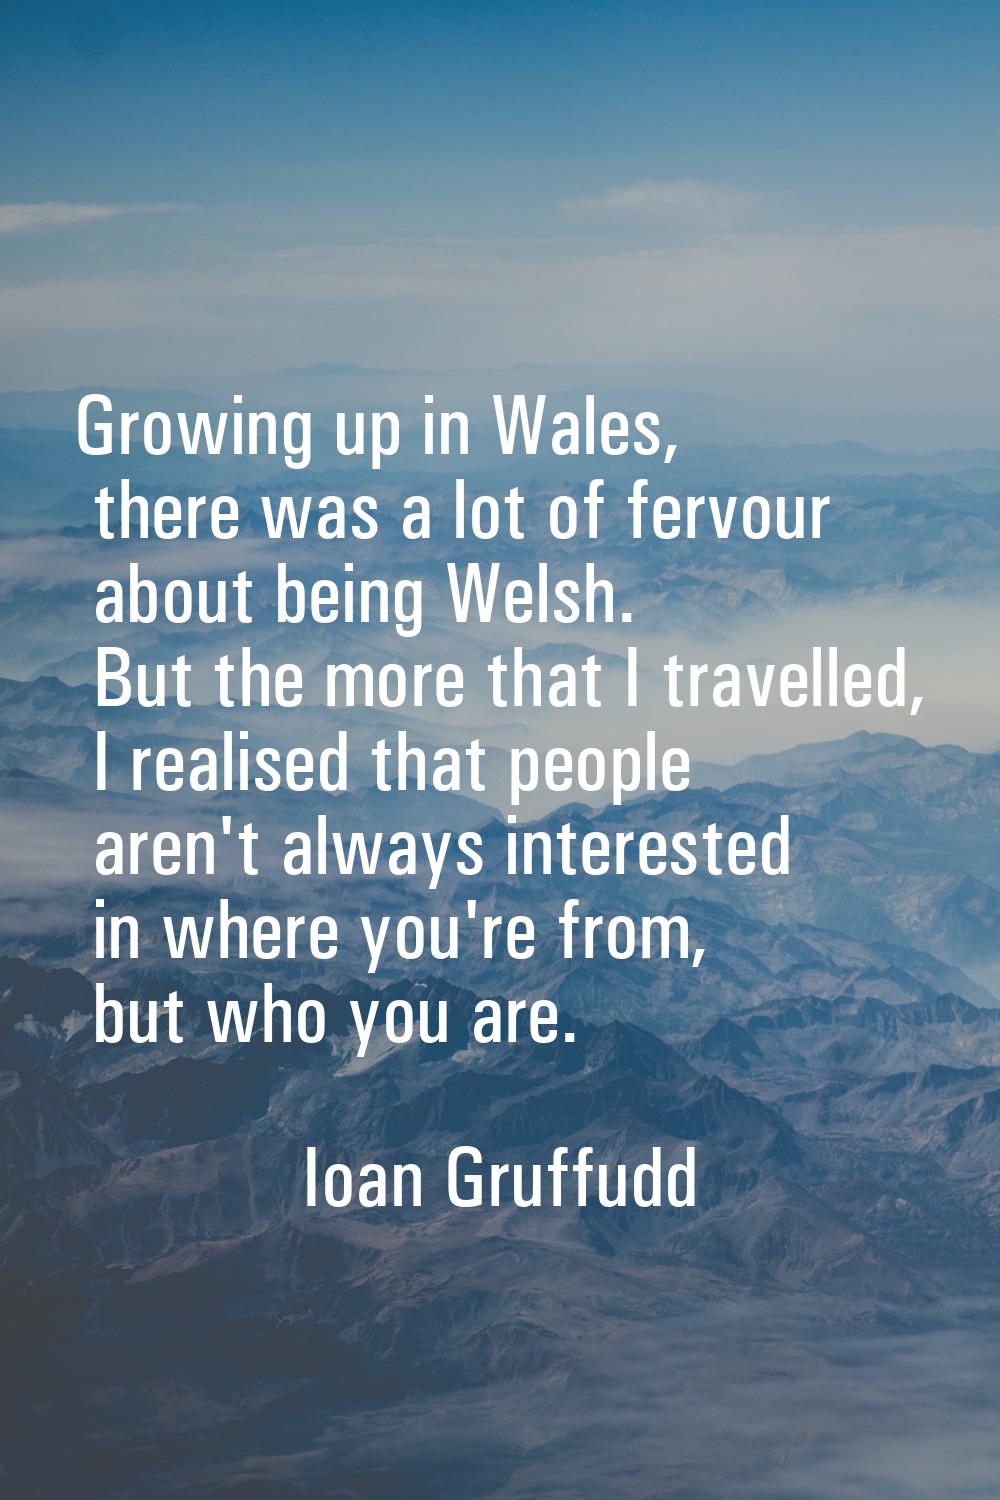 Growing up in Wales, there was a lot of fervour about being Welsh. But the more that I travelled, I